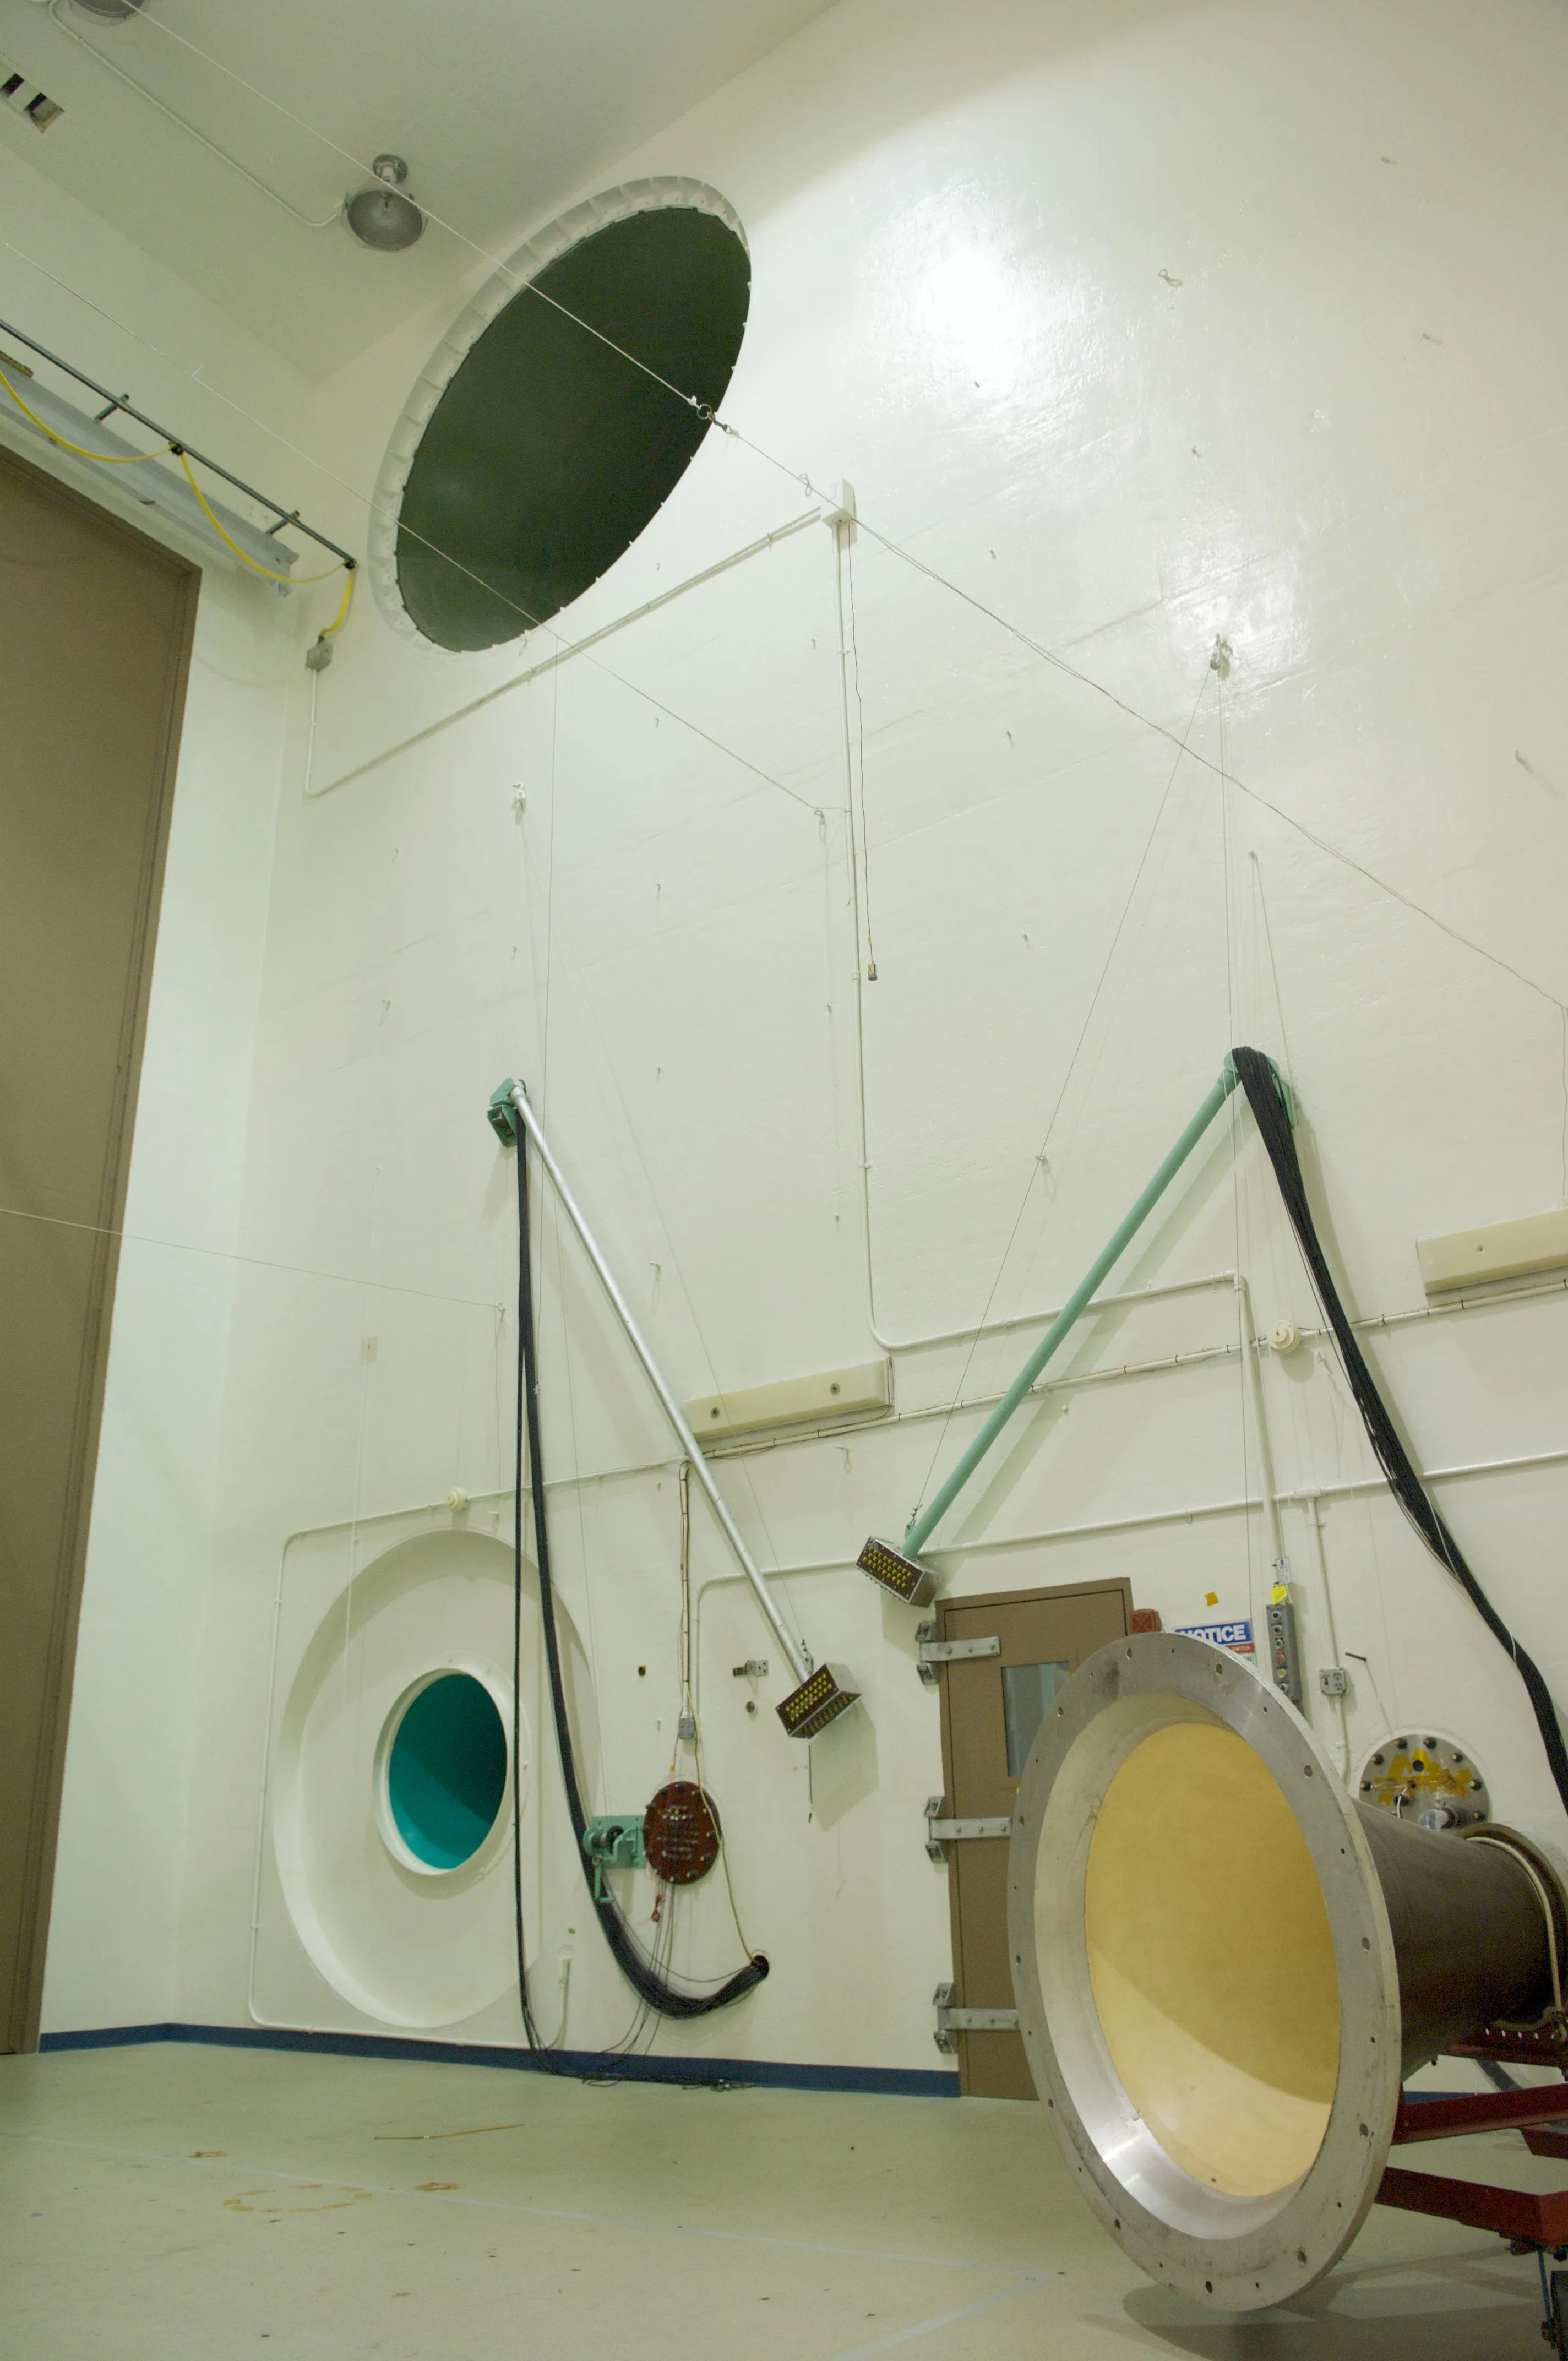 Photo of the horns in the Goddard Acoustic Test Chamber